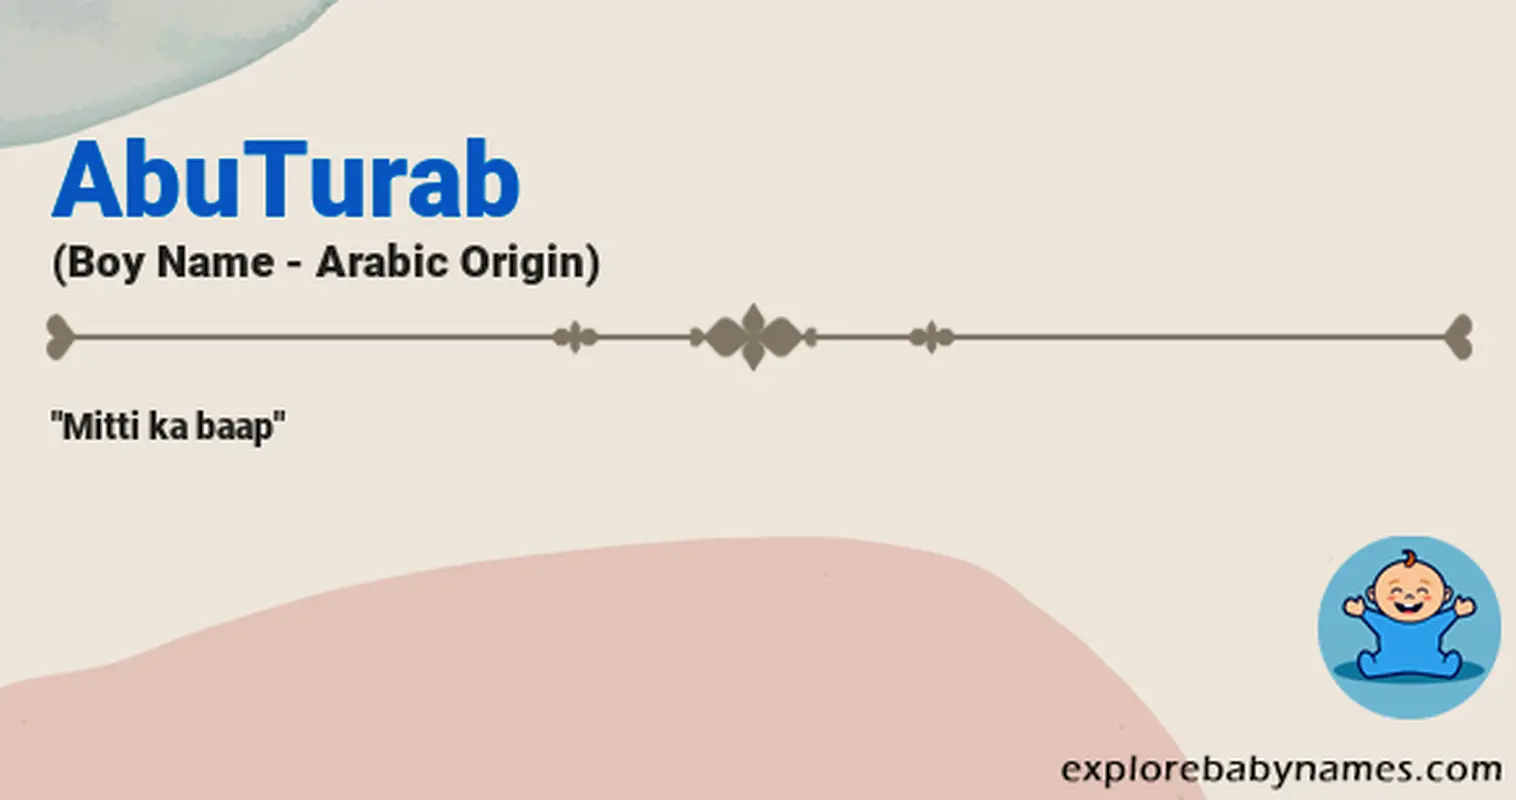 Meaning of AbuTurab